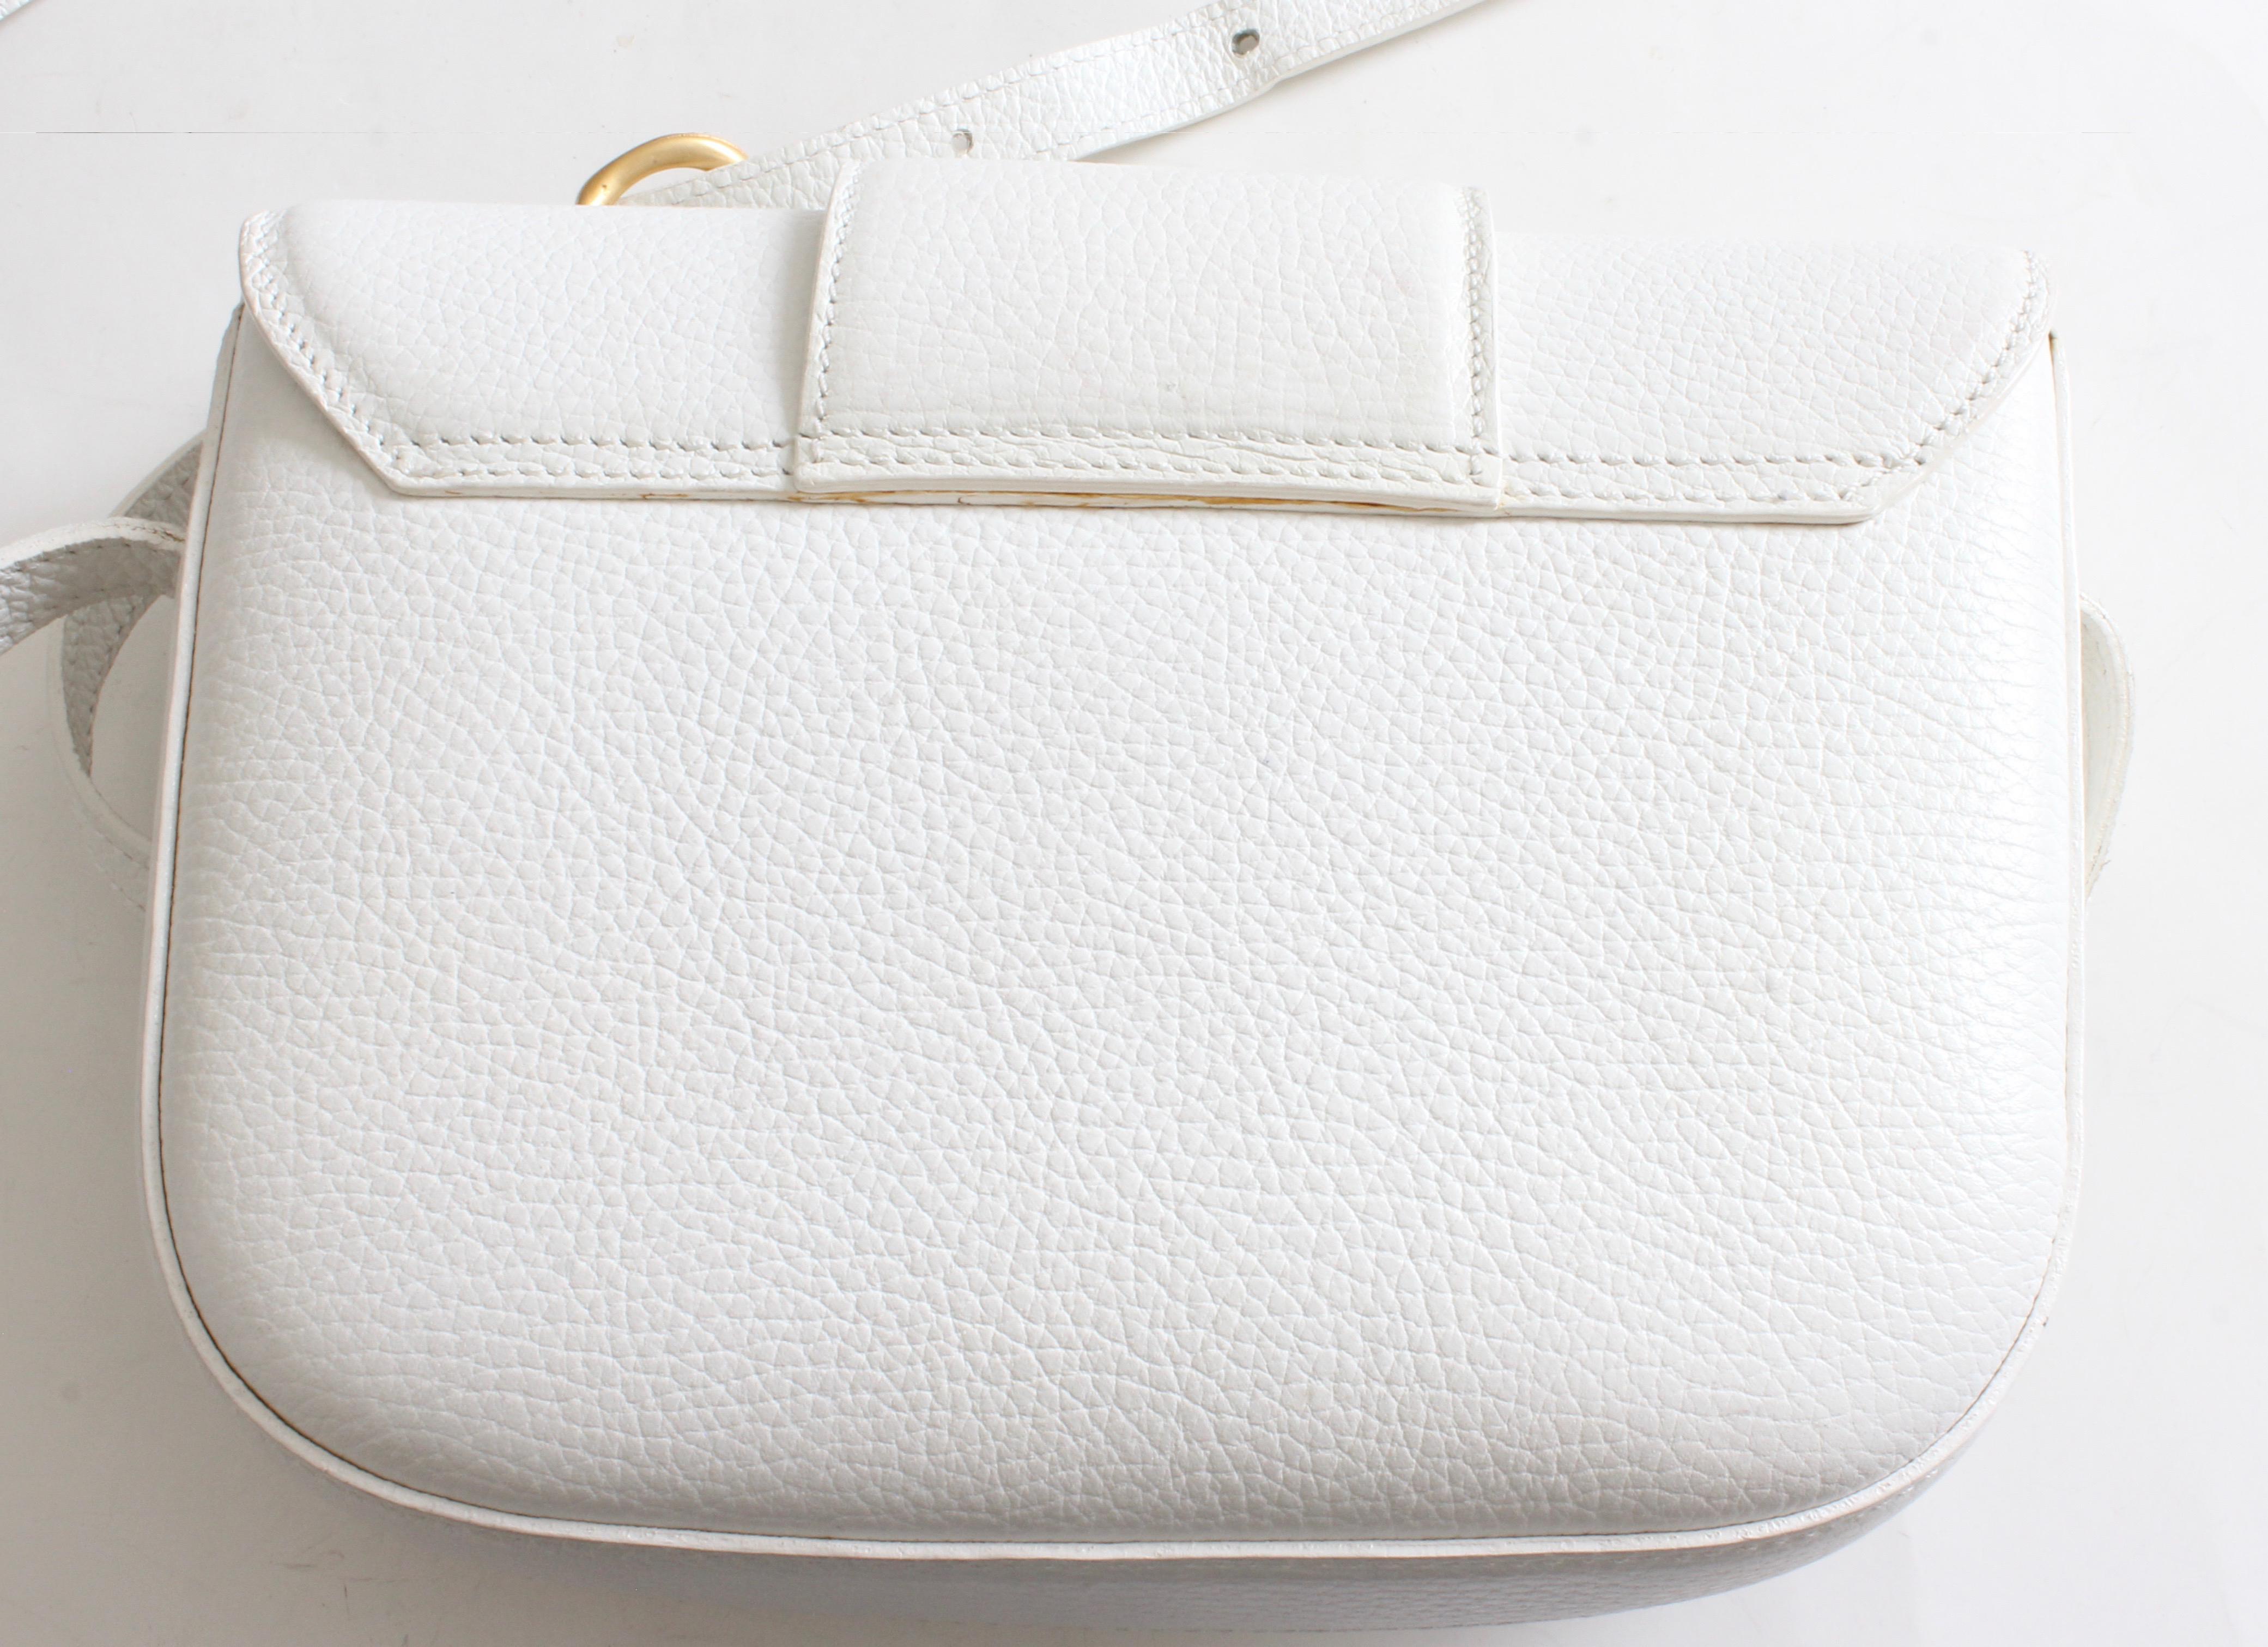 Women's Bally Crossbody Bag White Pebbled Leather Top Flap Shoulder Bag Italy